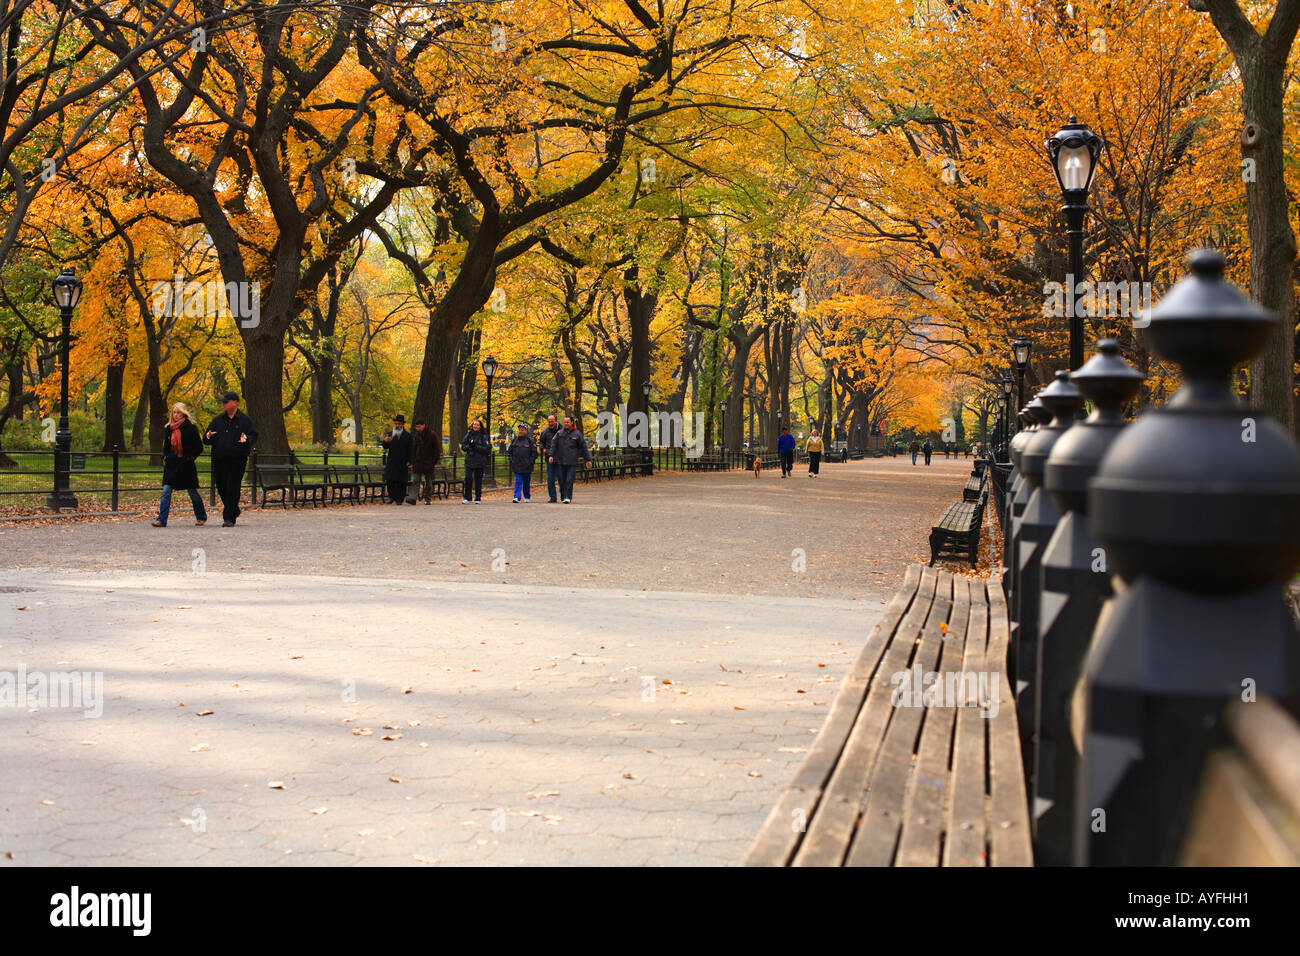 Bench and Pathway in Central Park, New York City Stock Photo